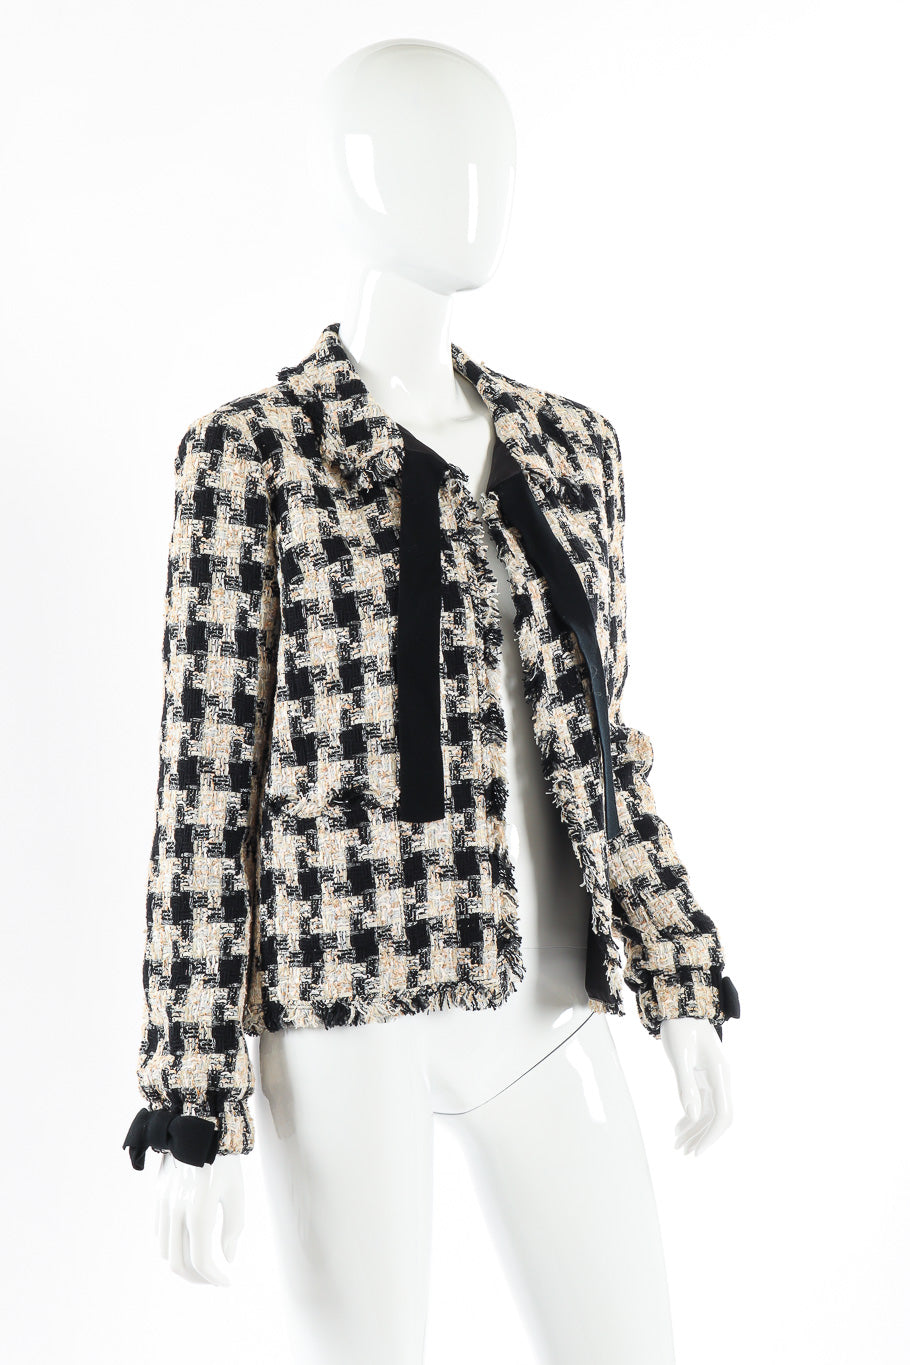 Bouclé check jacket by Chanel mannequin front untied @recessla